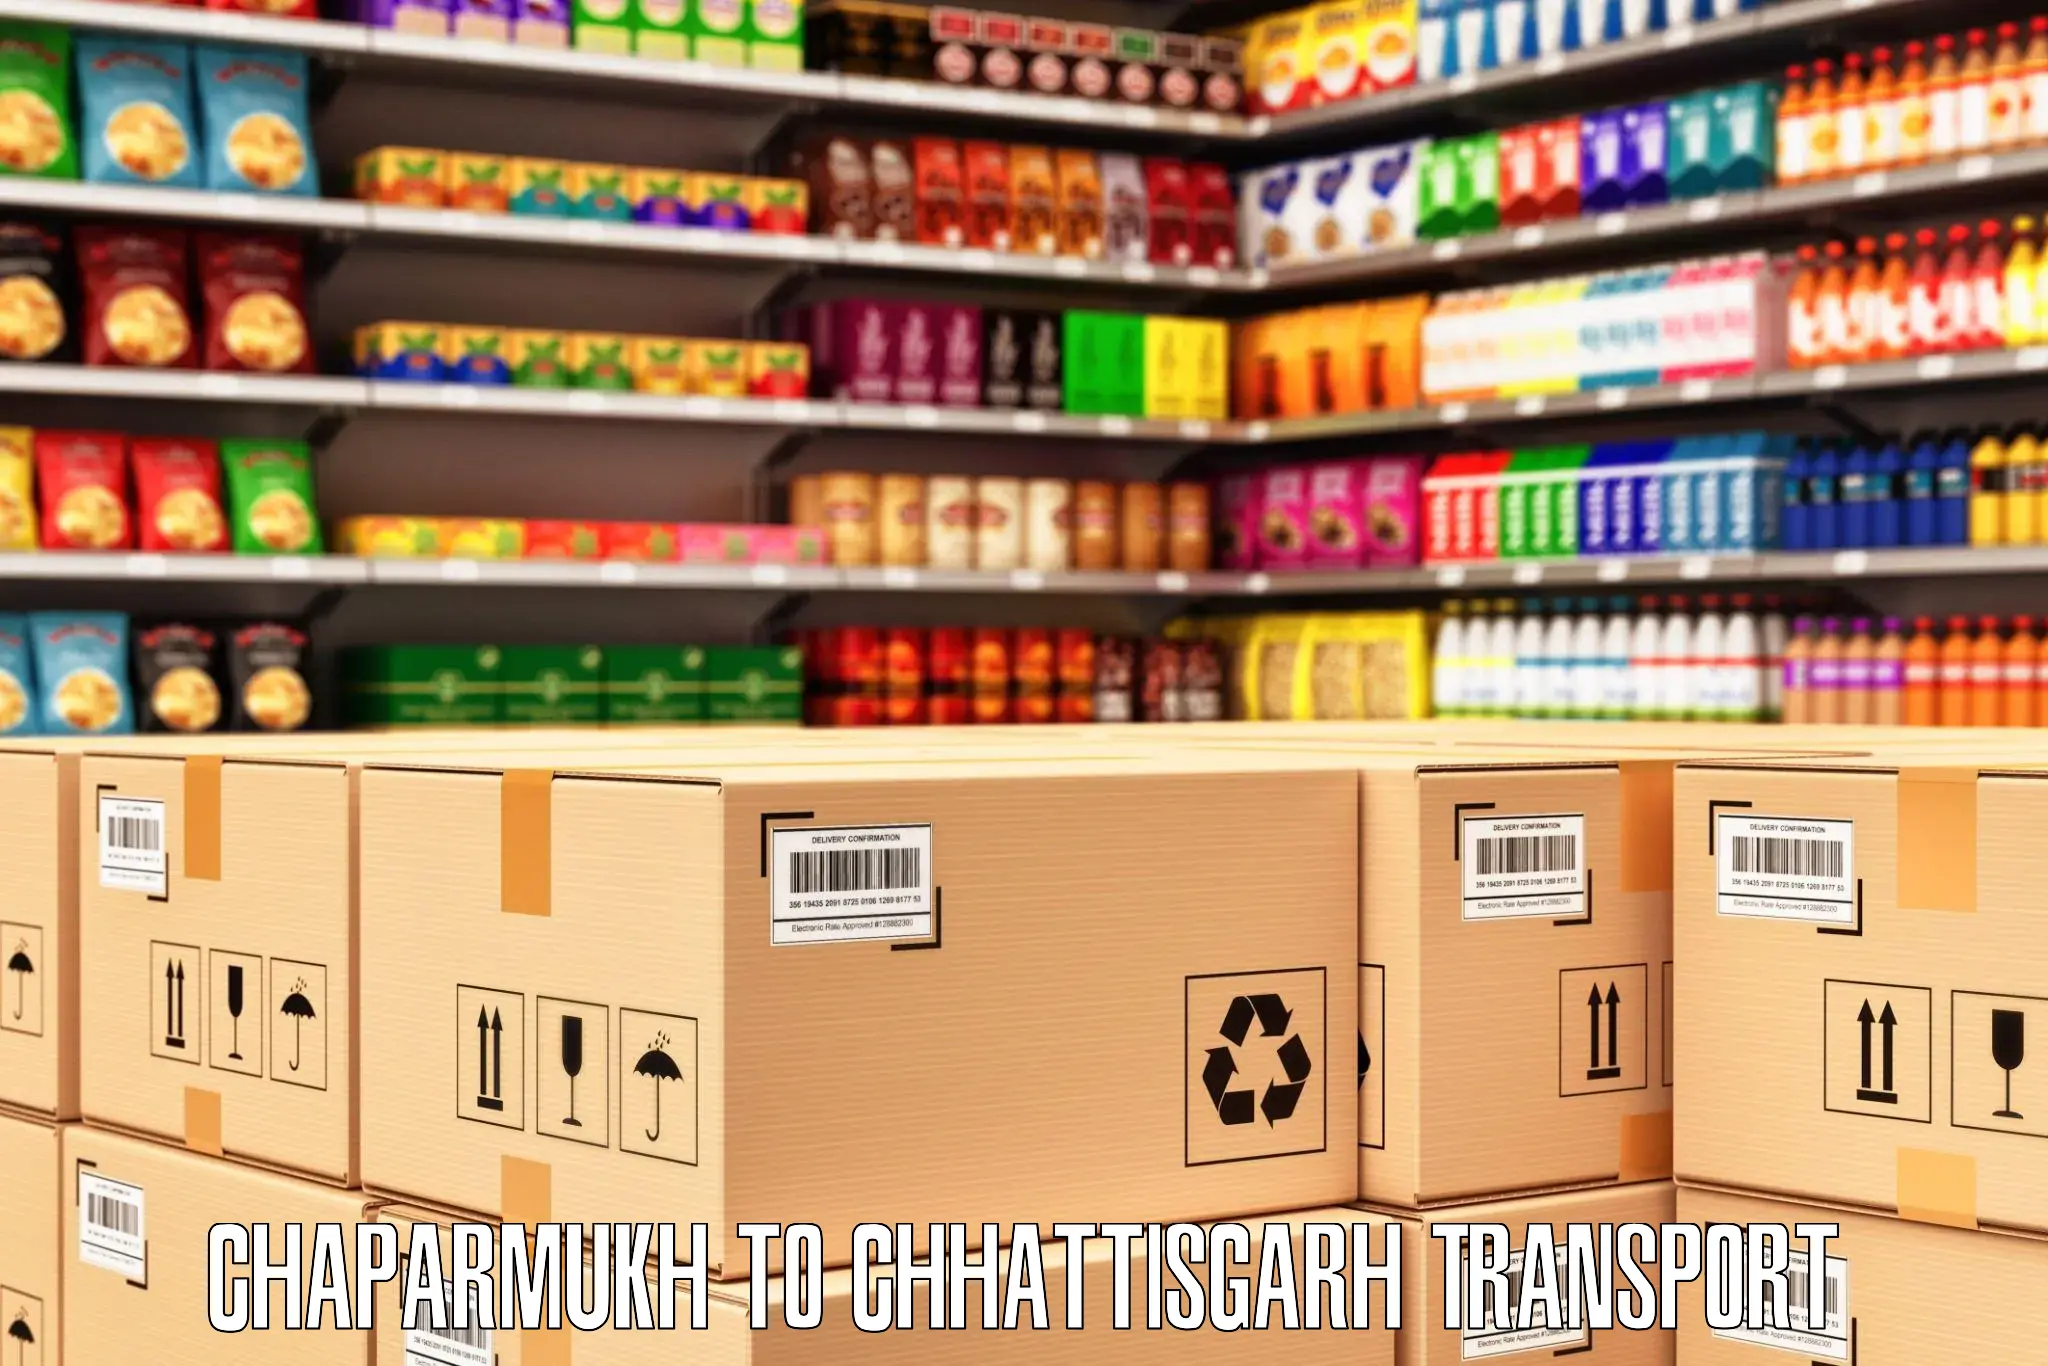 Truck transport companies in India Chaparmukh to Basna